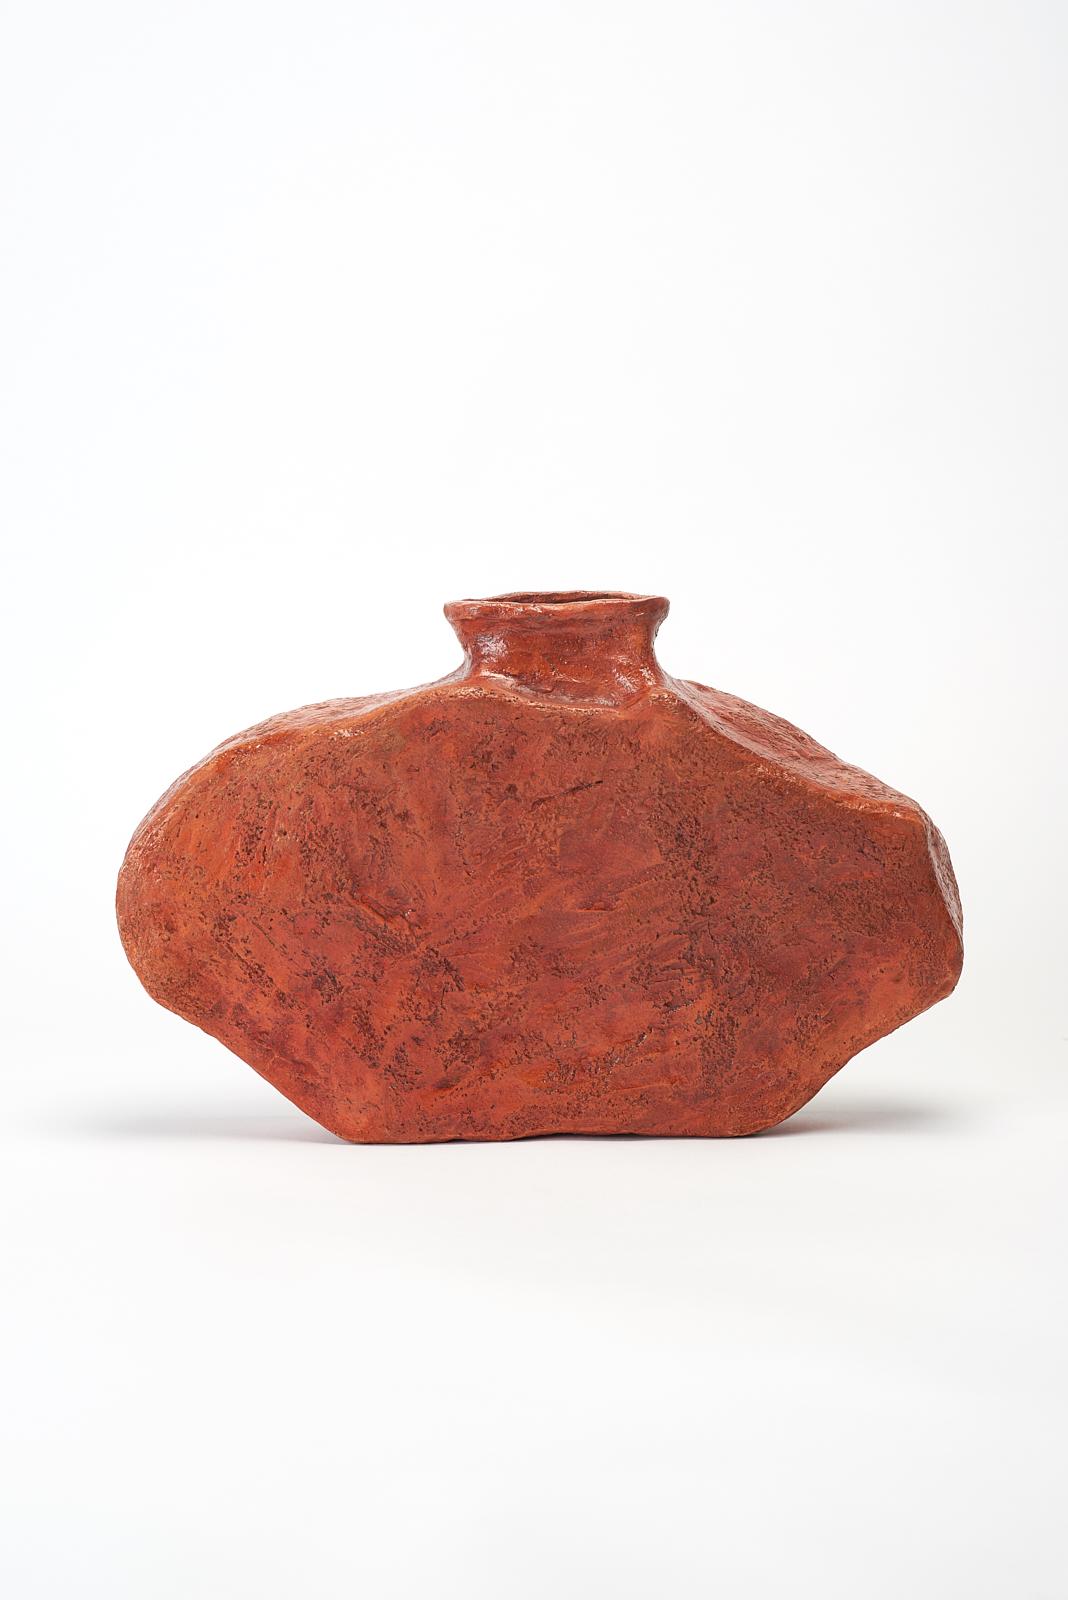 Jano Vase by Willem Van Hooff
Core Vessel Series
Dimensions: W 25 x D 10 x H 37 cm (Dimensions may vary as pieces are hand-made and might present slight variations in sizes)
Materials: Earthenware, ceramic, pigments, glaze.

Core is a series of flat